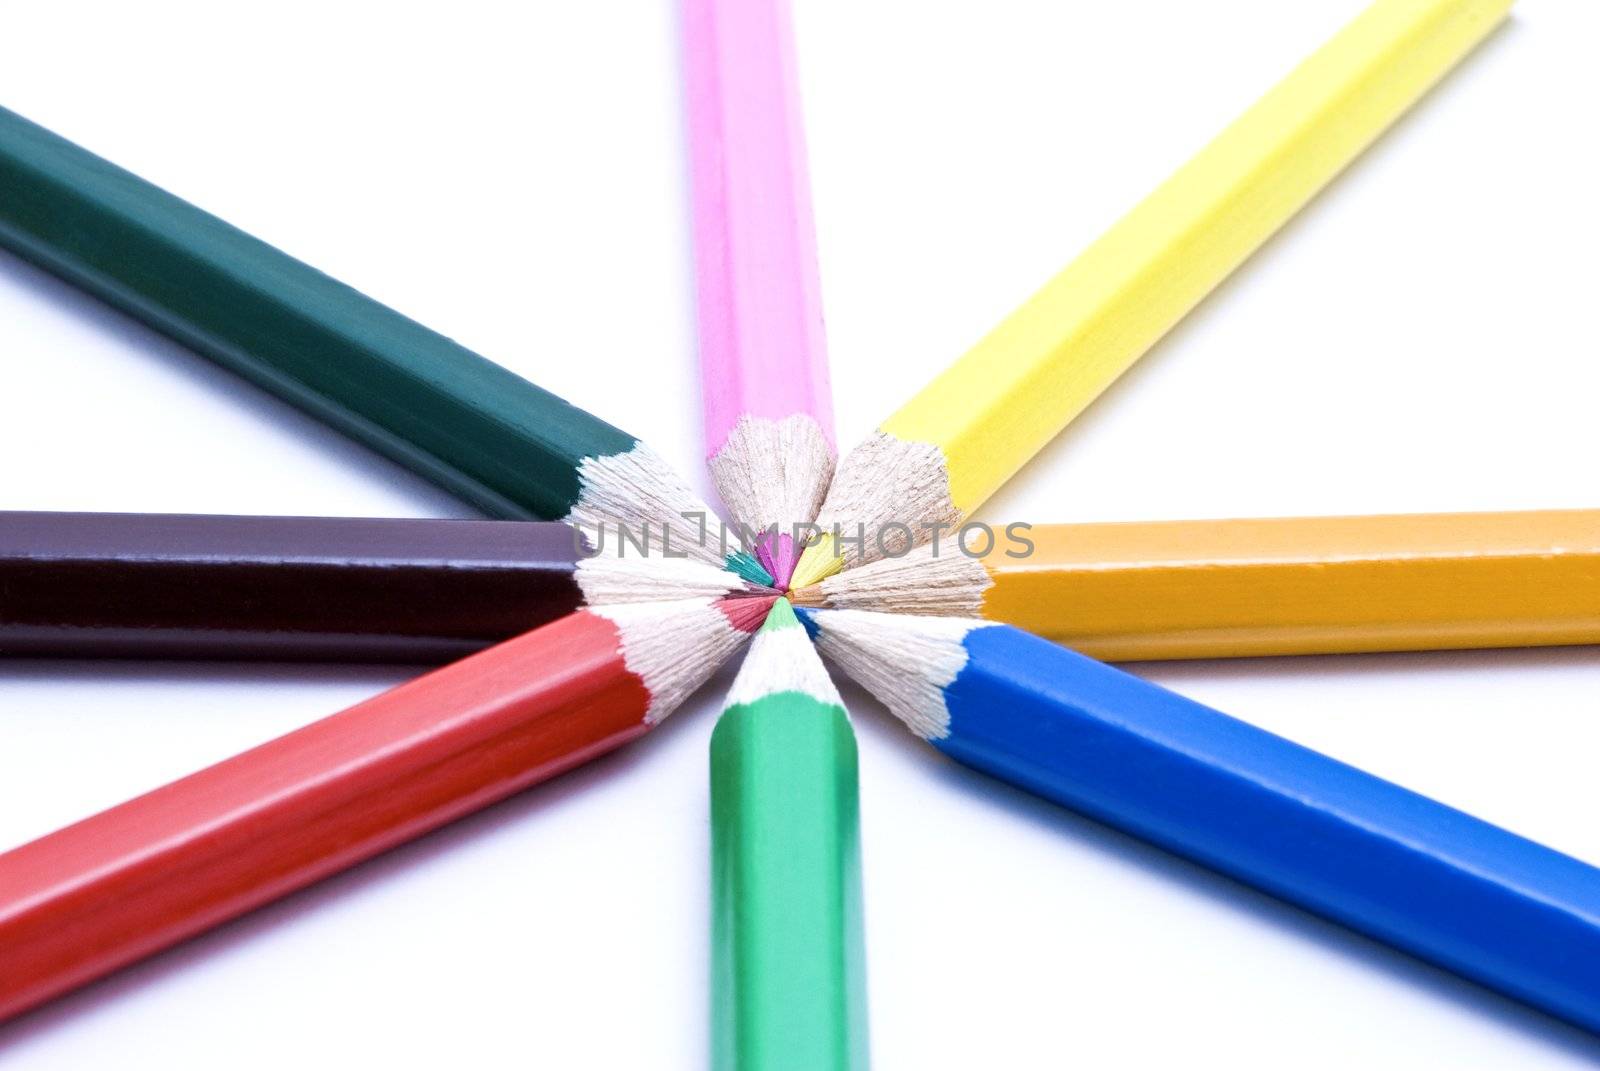 Coloured pencils laid out in a circle with tips pointing inwards.  White background.